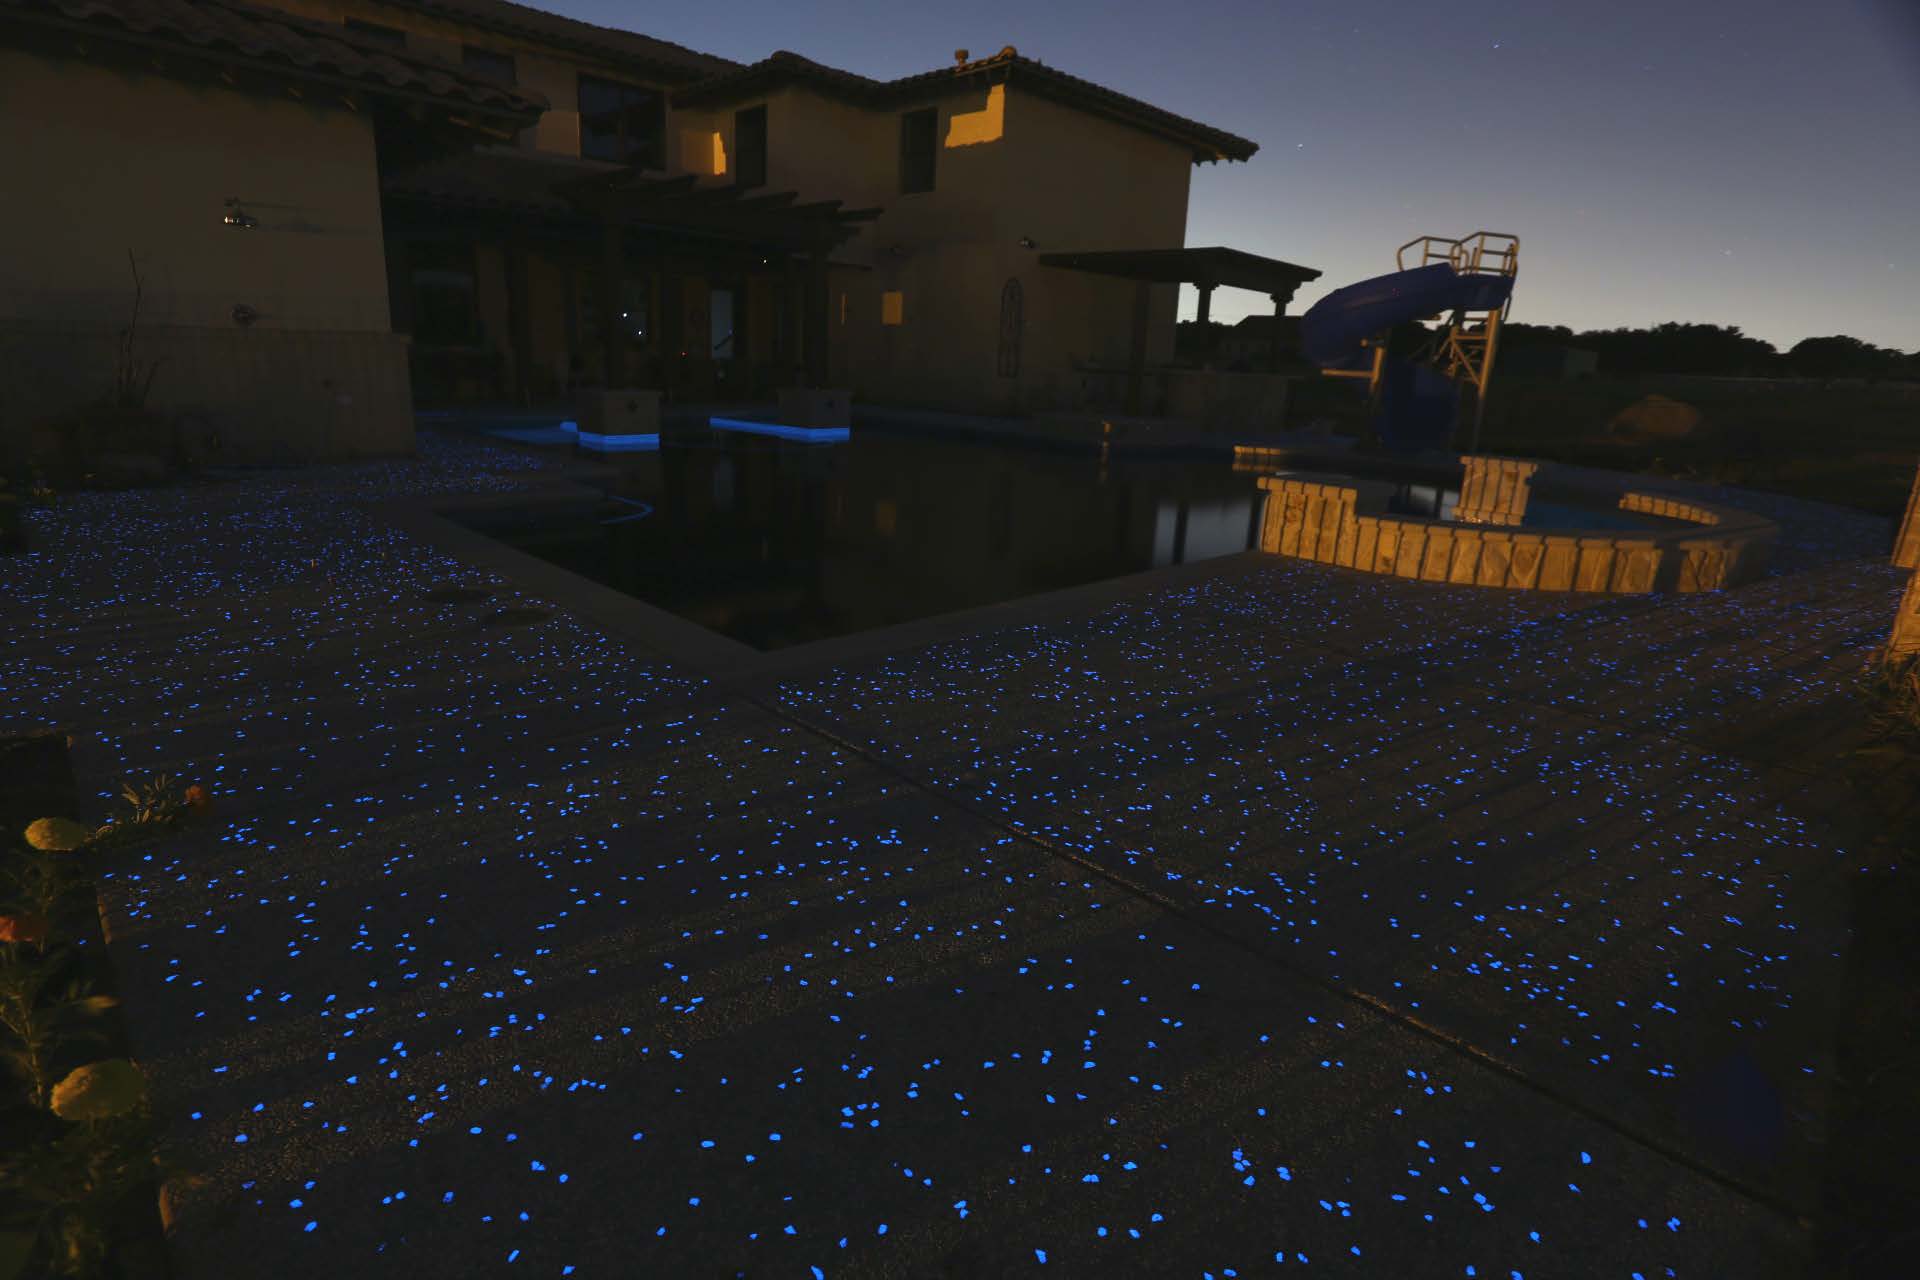 Outdoor Rooms like this one with photoluminecent aggregate glows at night